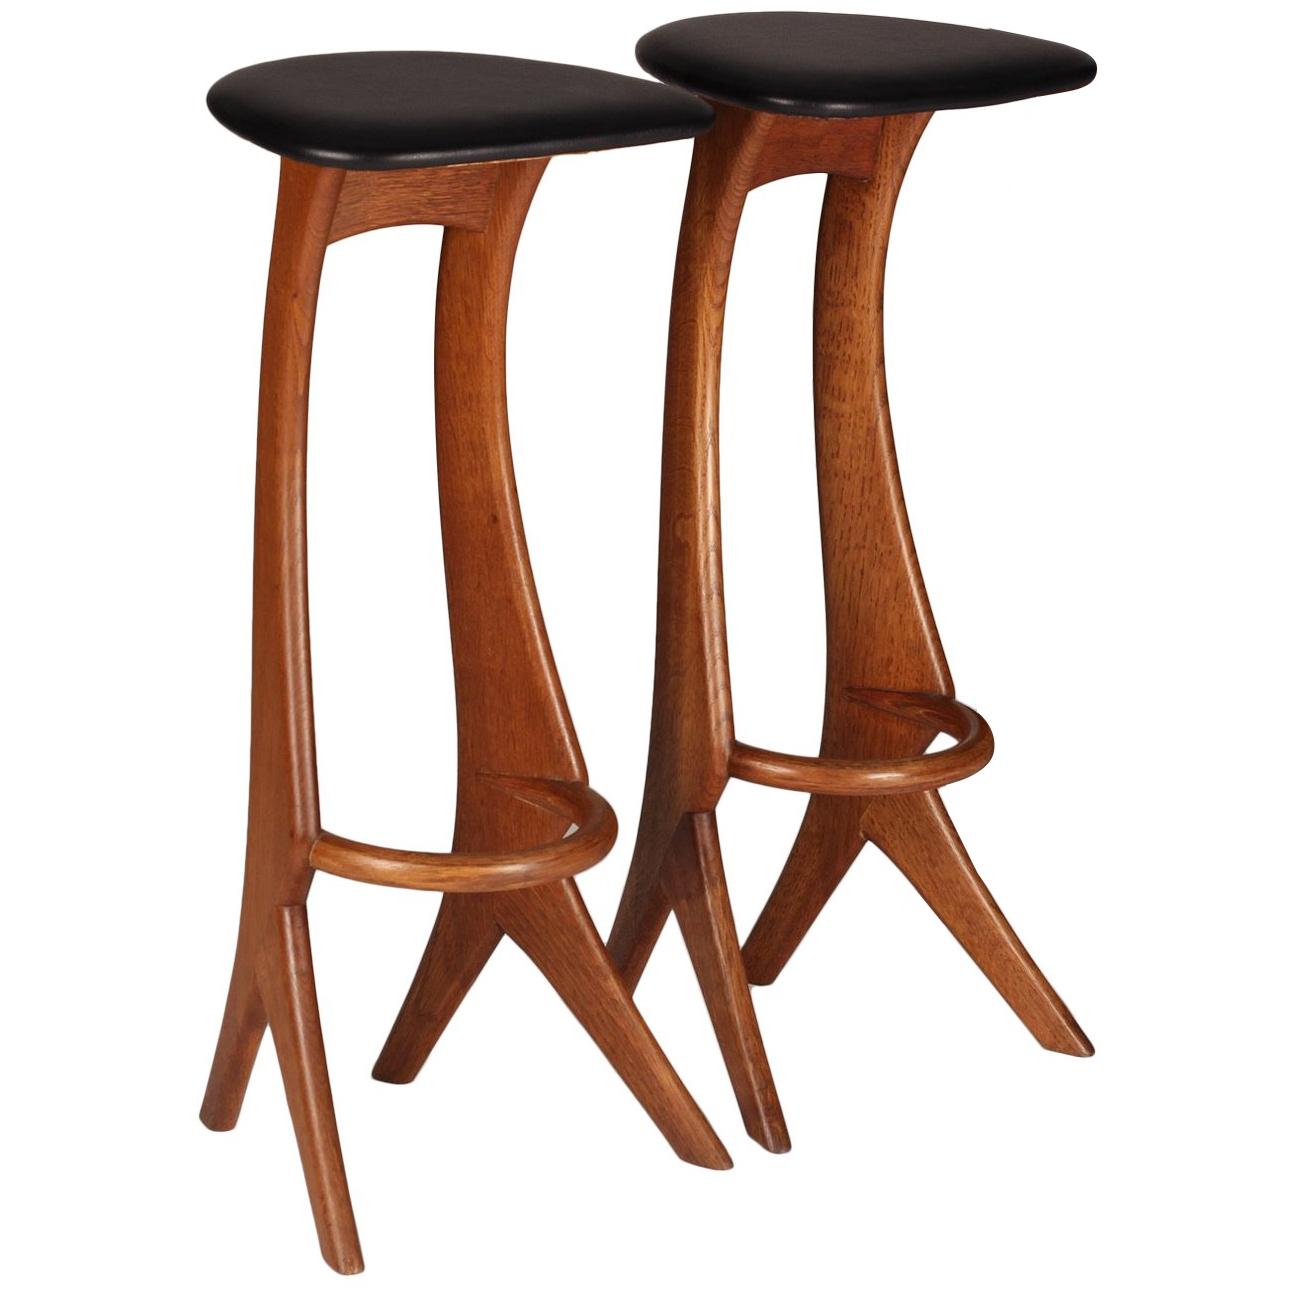 Midcentury Barstools in Teak and Leather by Reyway